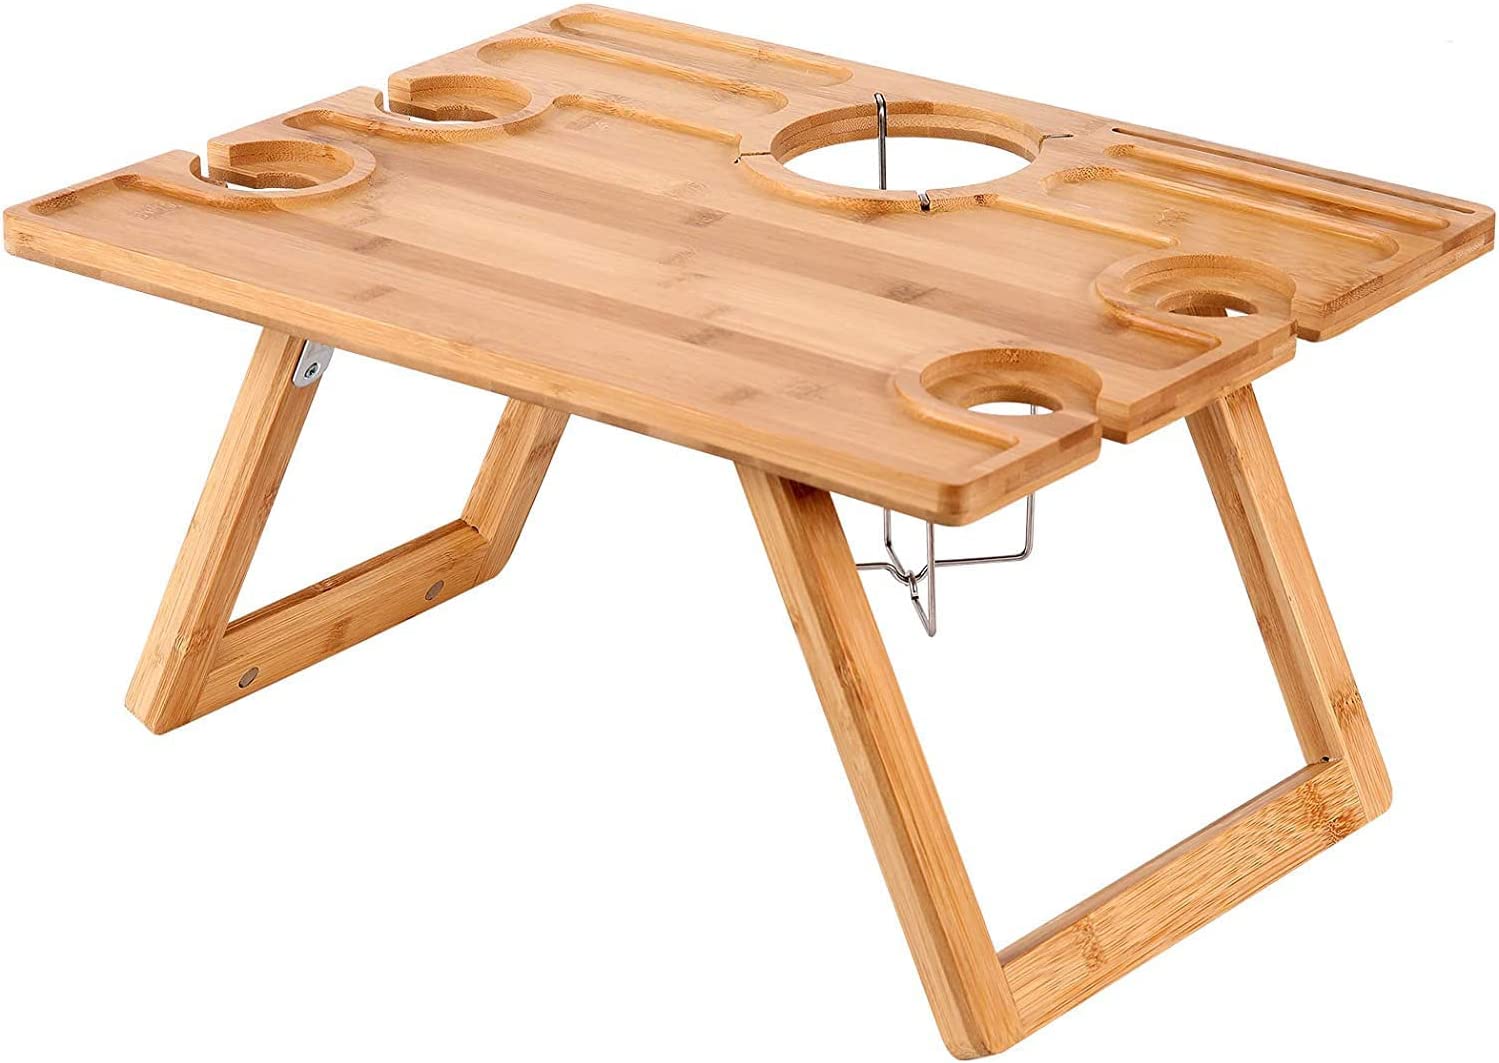 Portable Outdoor Bamboo Picnic Dining Table (Includes 4 Cheese Knives)